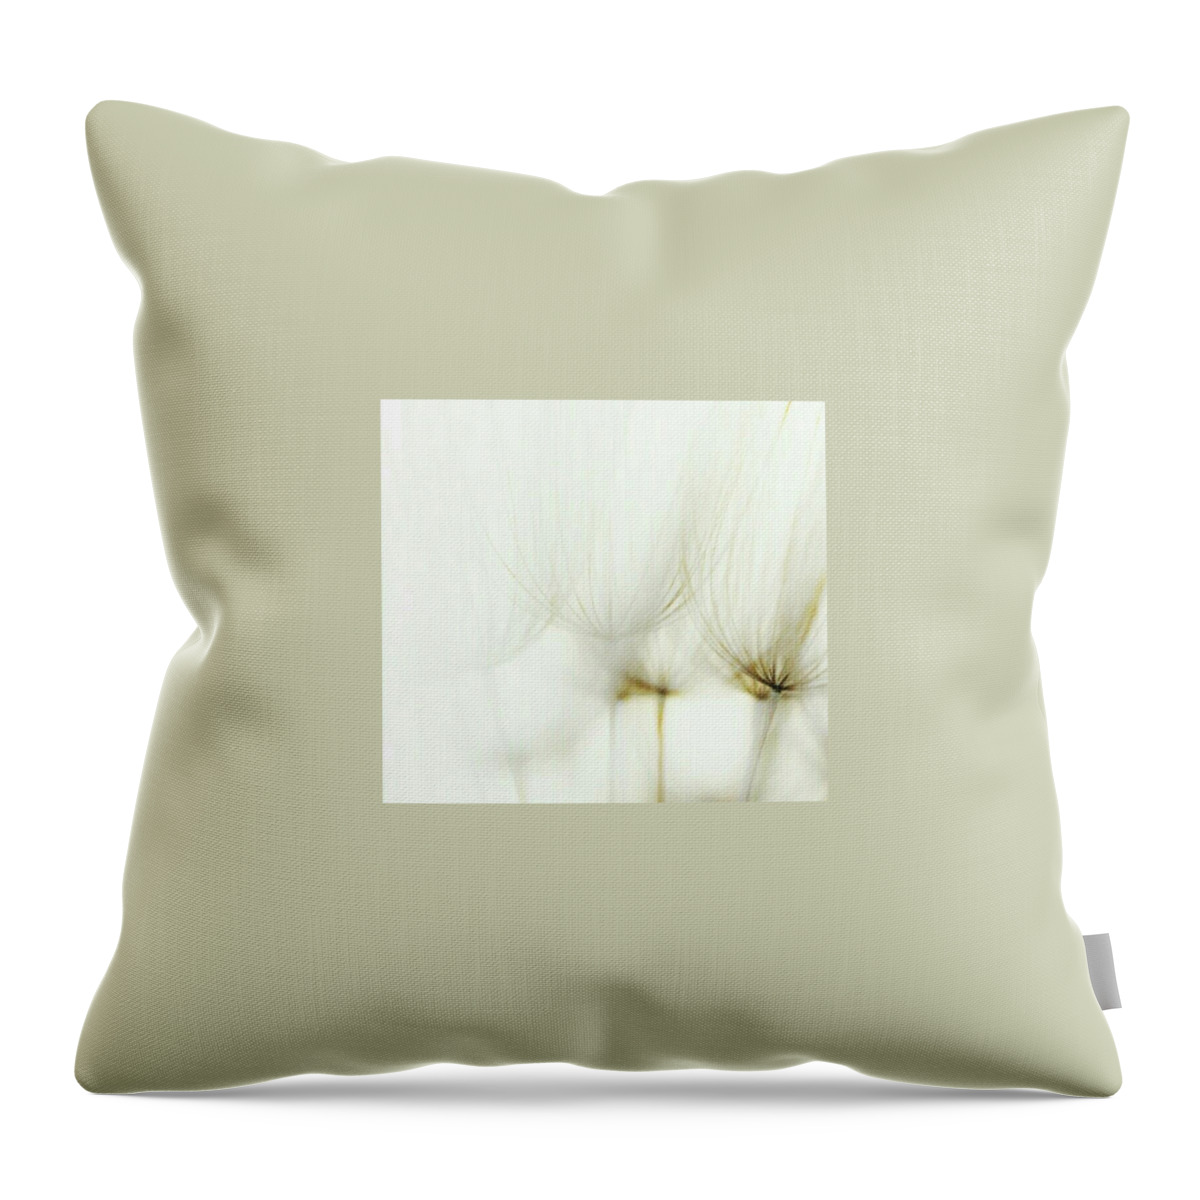 Dandelions Throw Pillow featuring the photograph Tender Childhood Wishes by The Art Of Marilyn Ridoutt-Greene